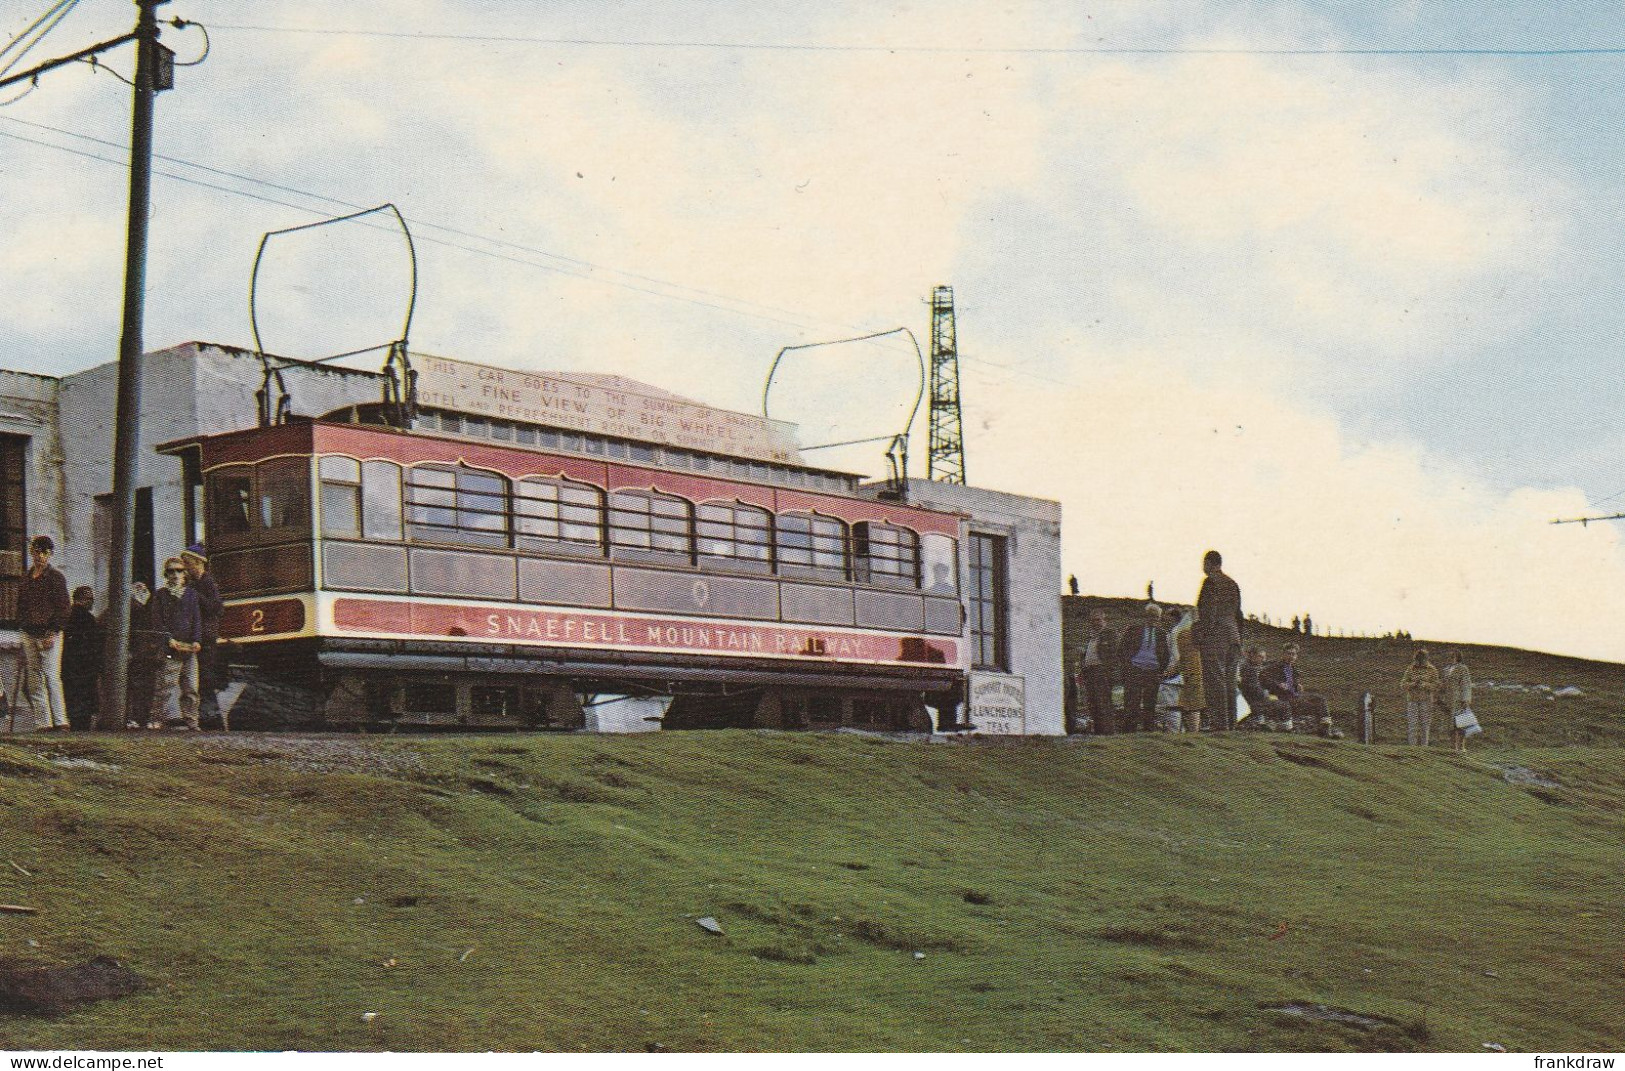 Postcard - Manx The Electric Railway, I.O.M. - Card No.pt23152 - Very Good - Unclassified